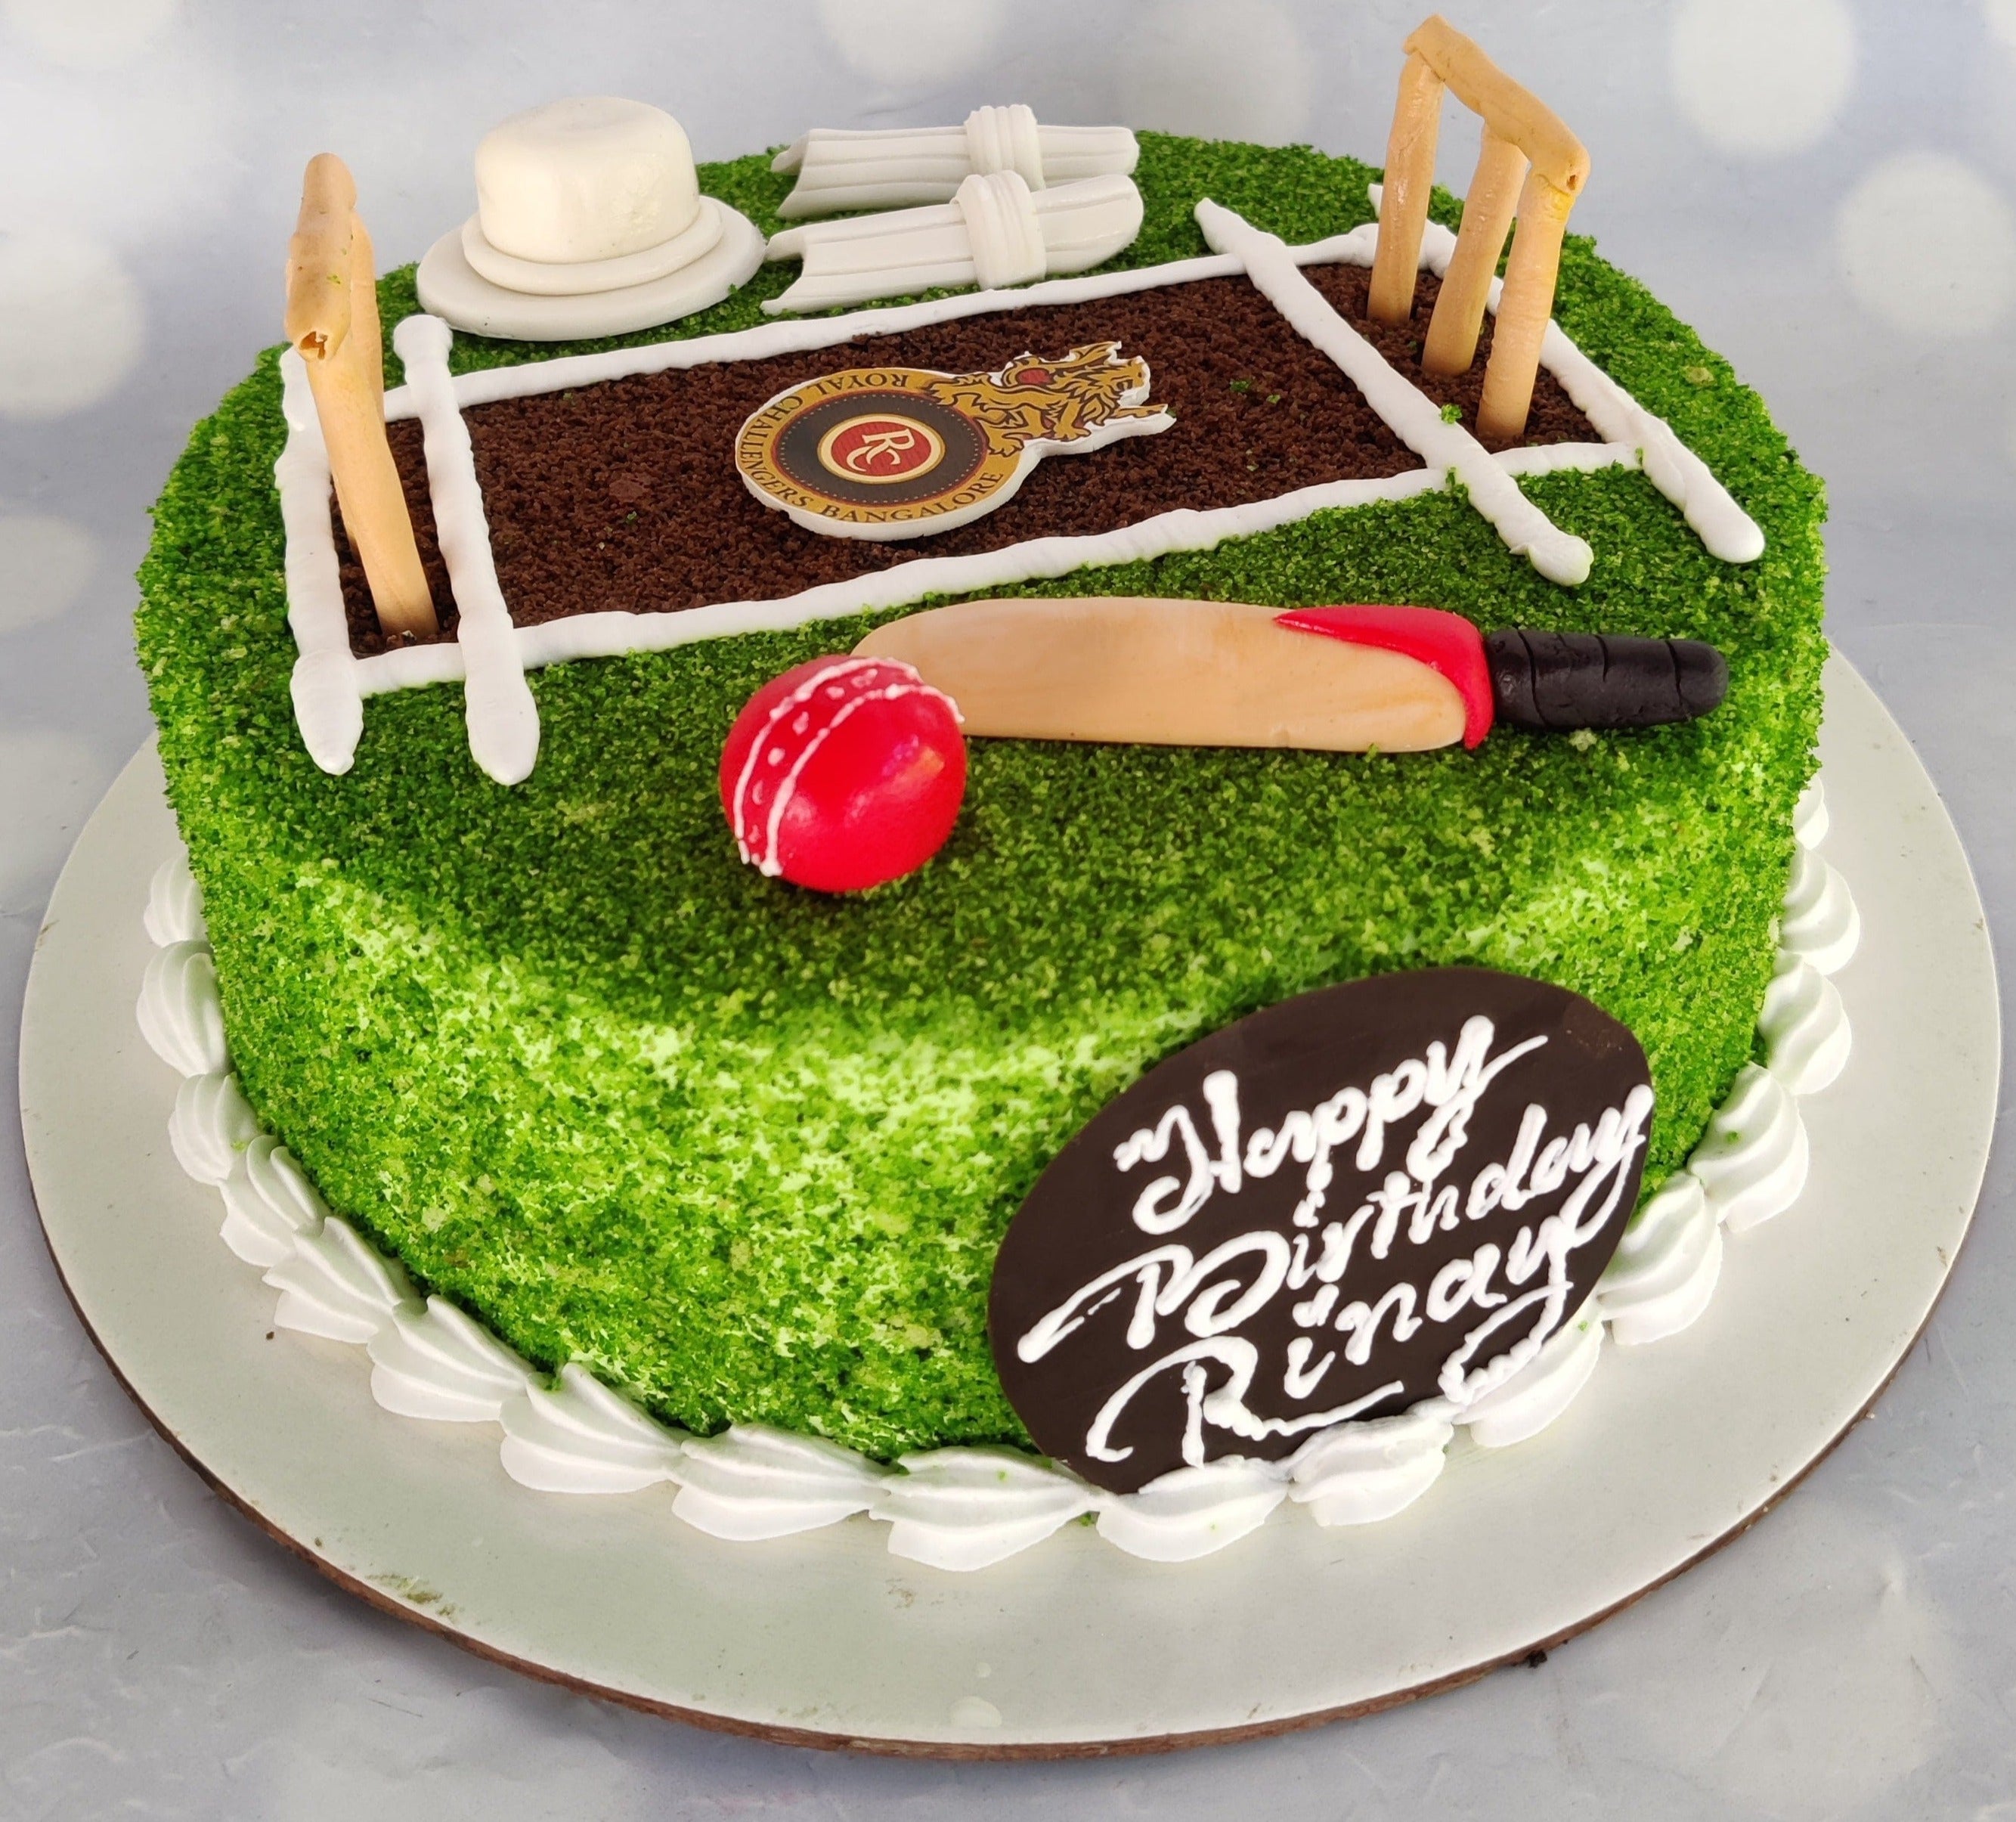 Cricket cake - The Great British Bake Off | The Great British Bake Off